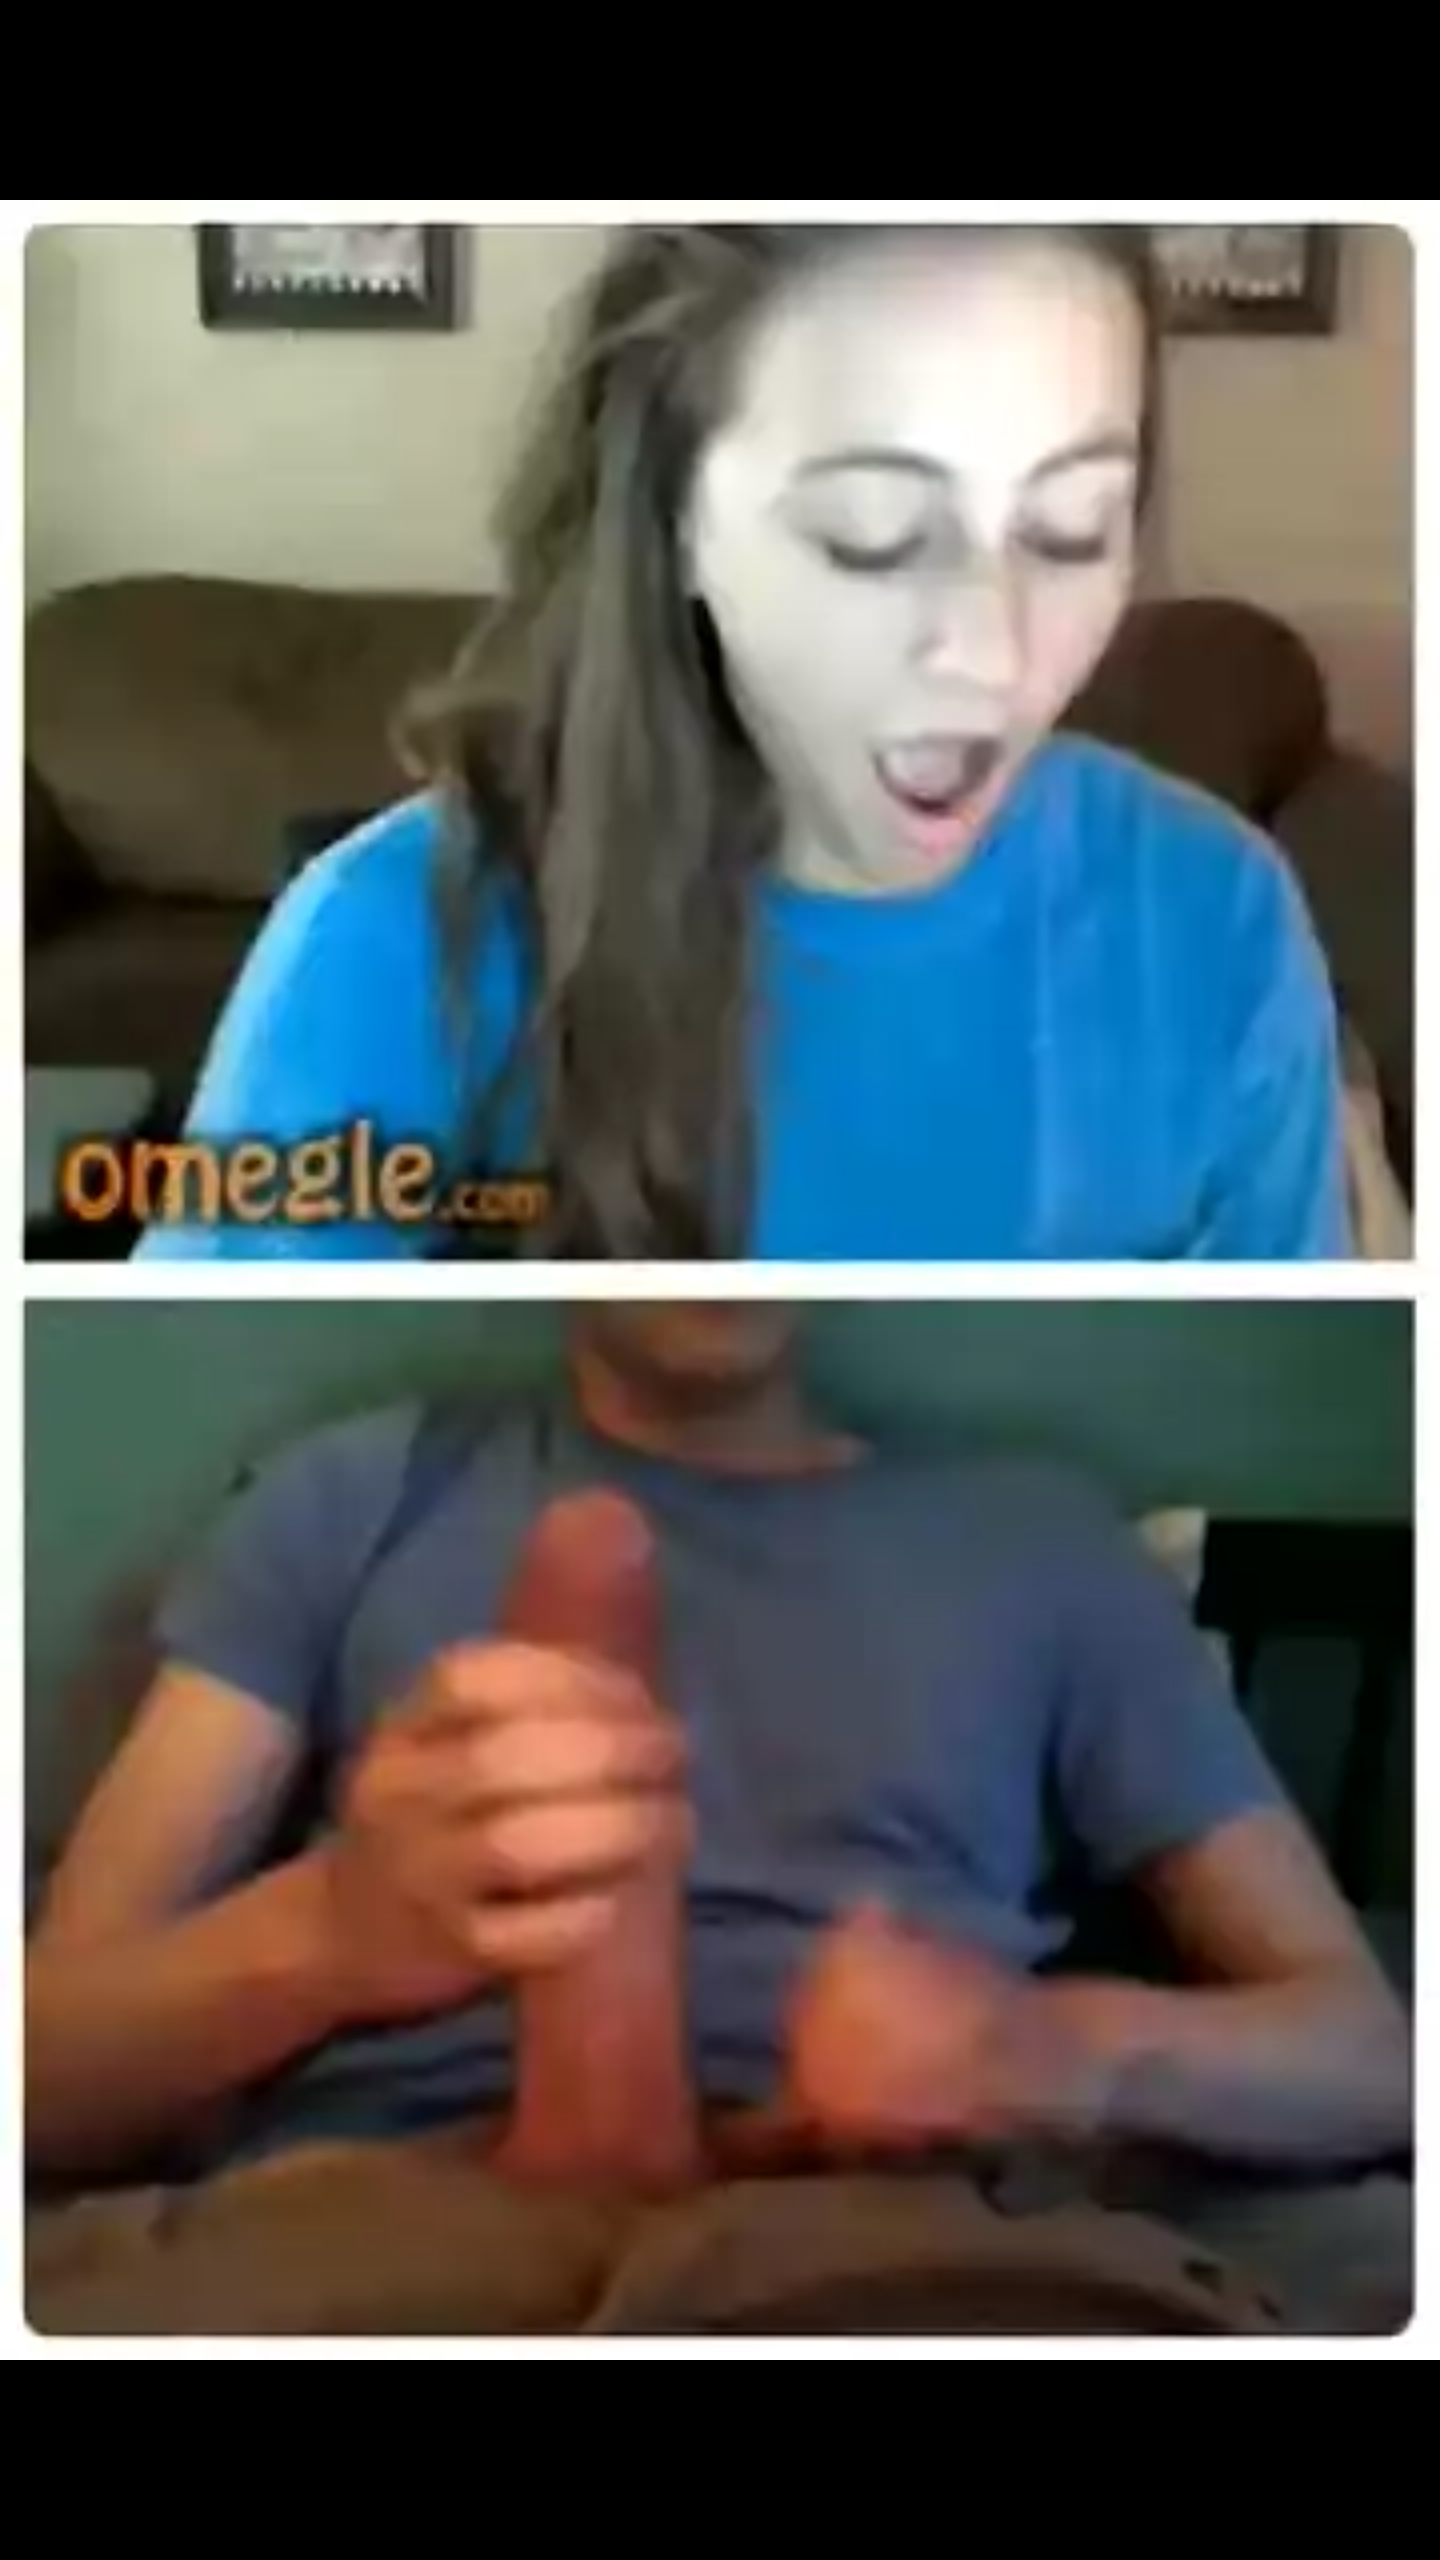 Blue shirt omegle girl reaction to dick